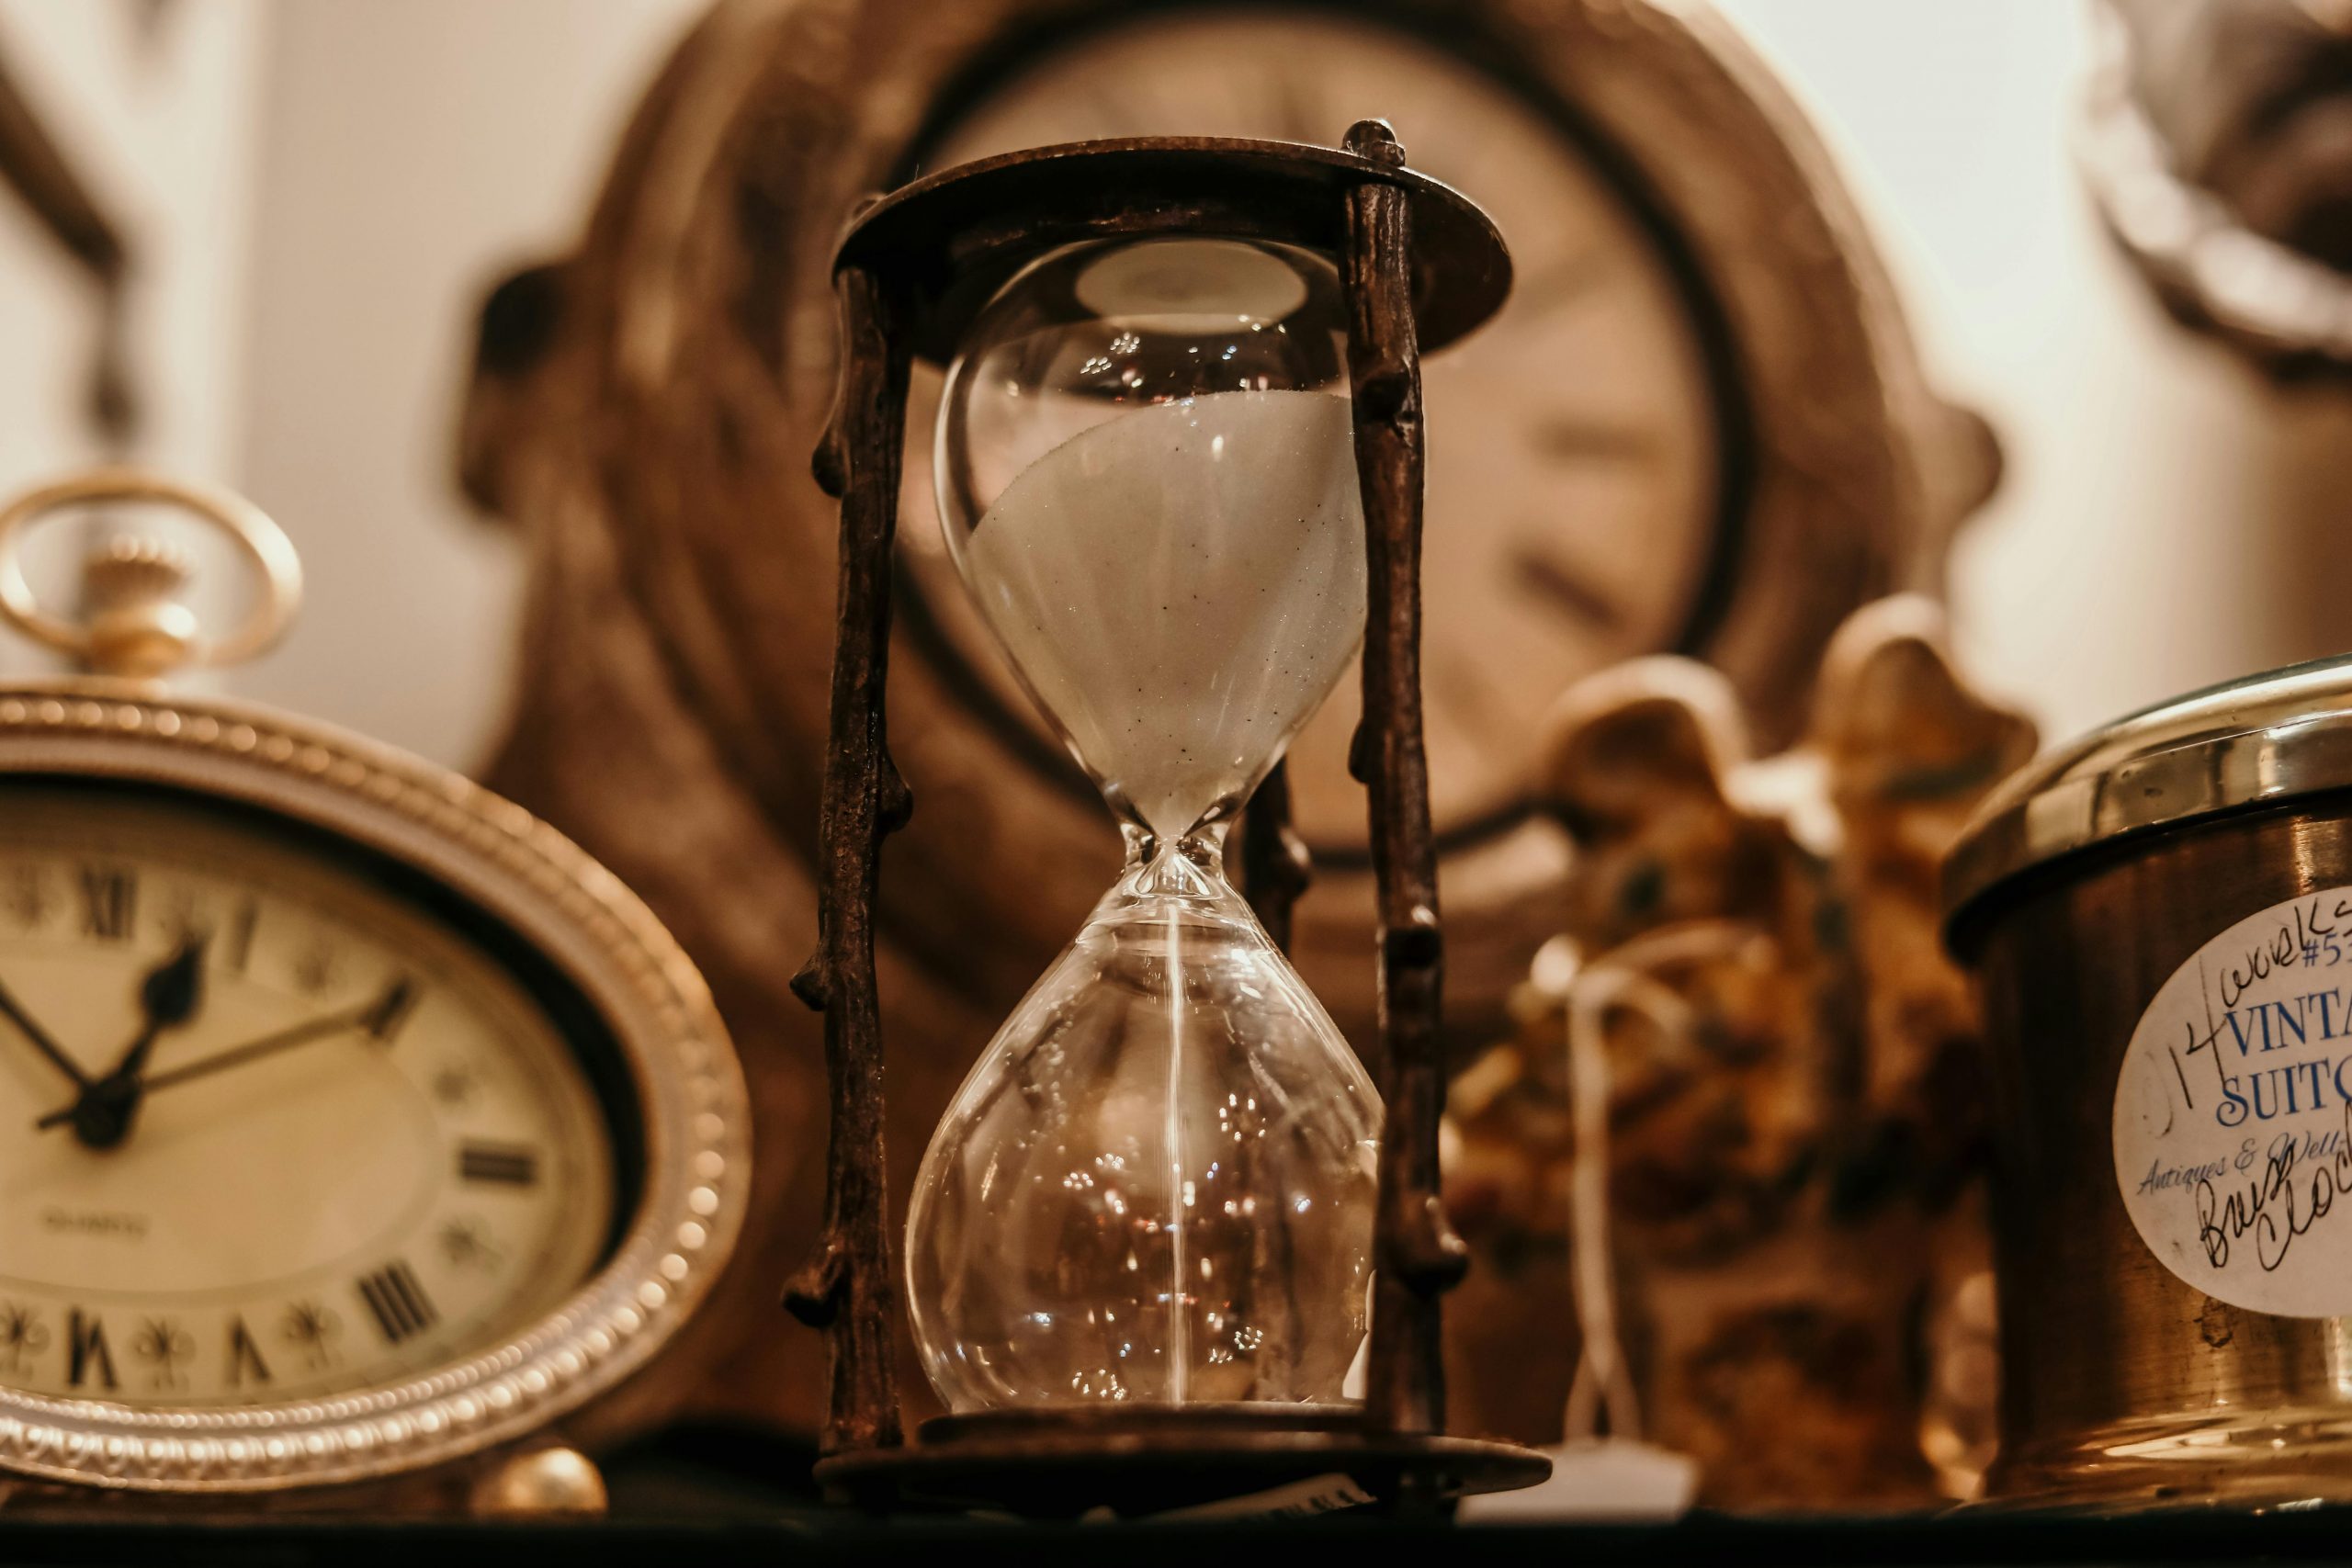 hour glass and clocks in a sepia tone